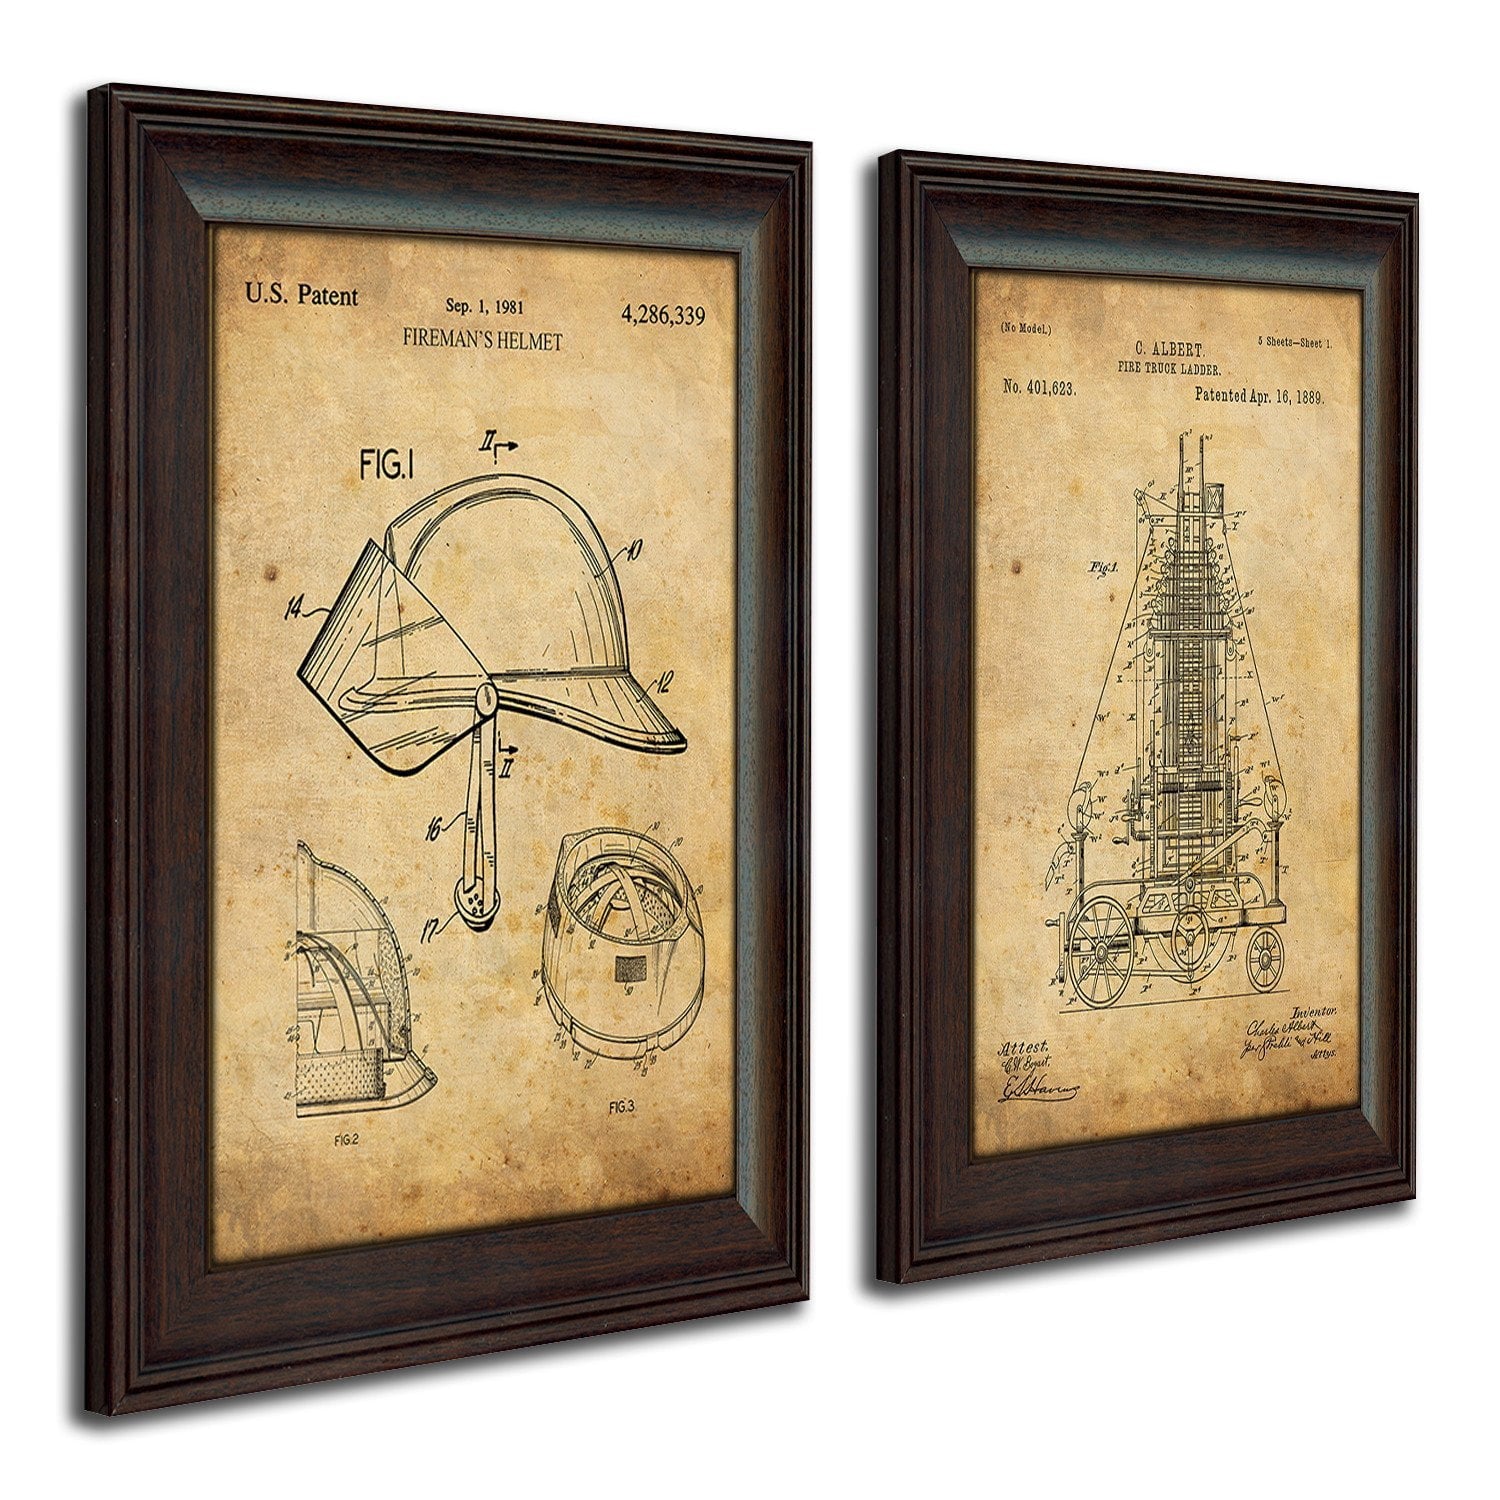 Firefighter wall decor using the original patent art of a firefighter's helmet and Fire Engine - Personal-Prints